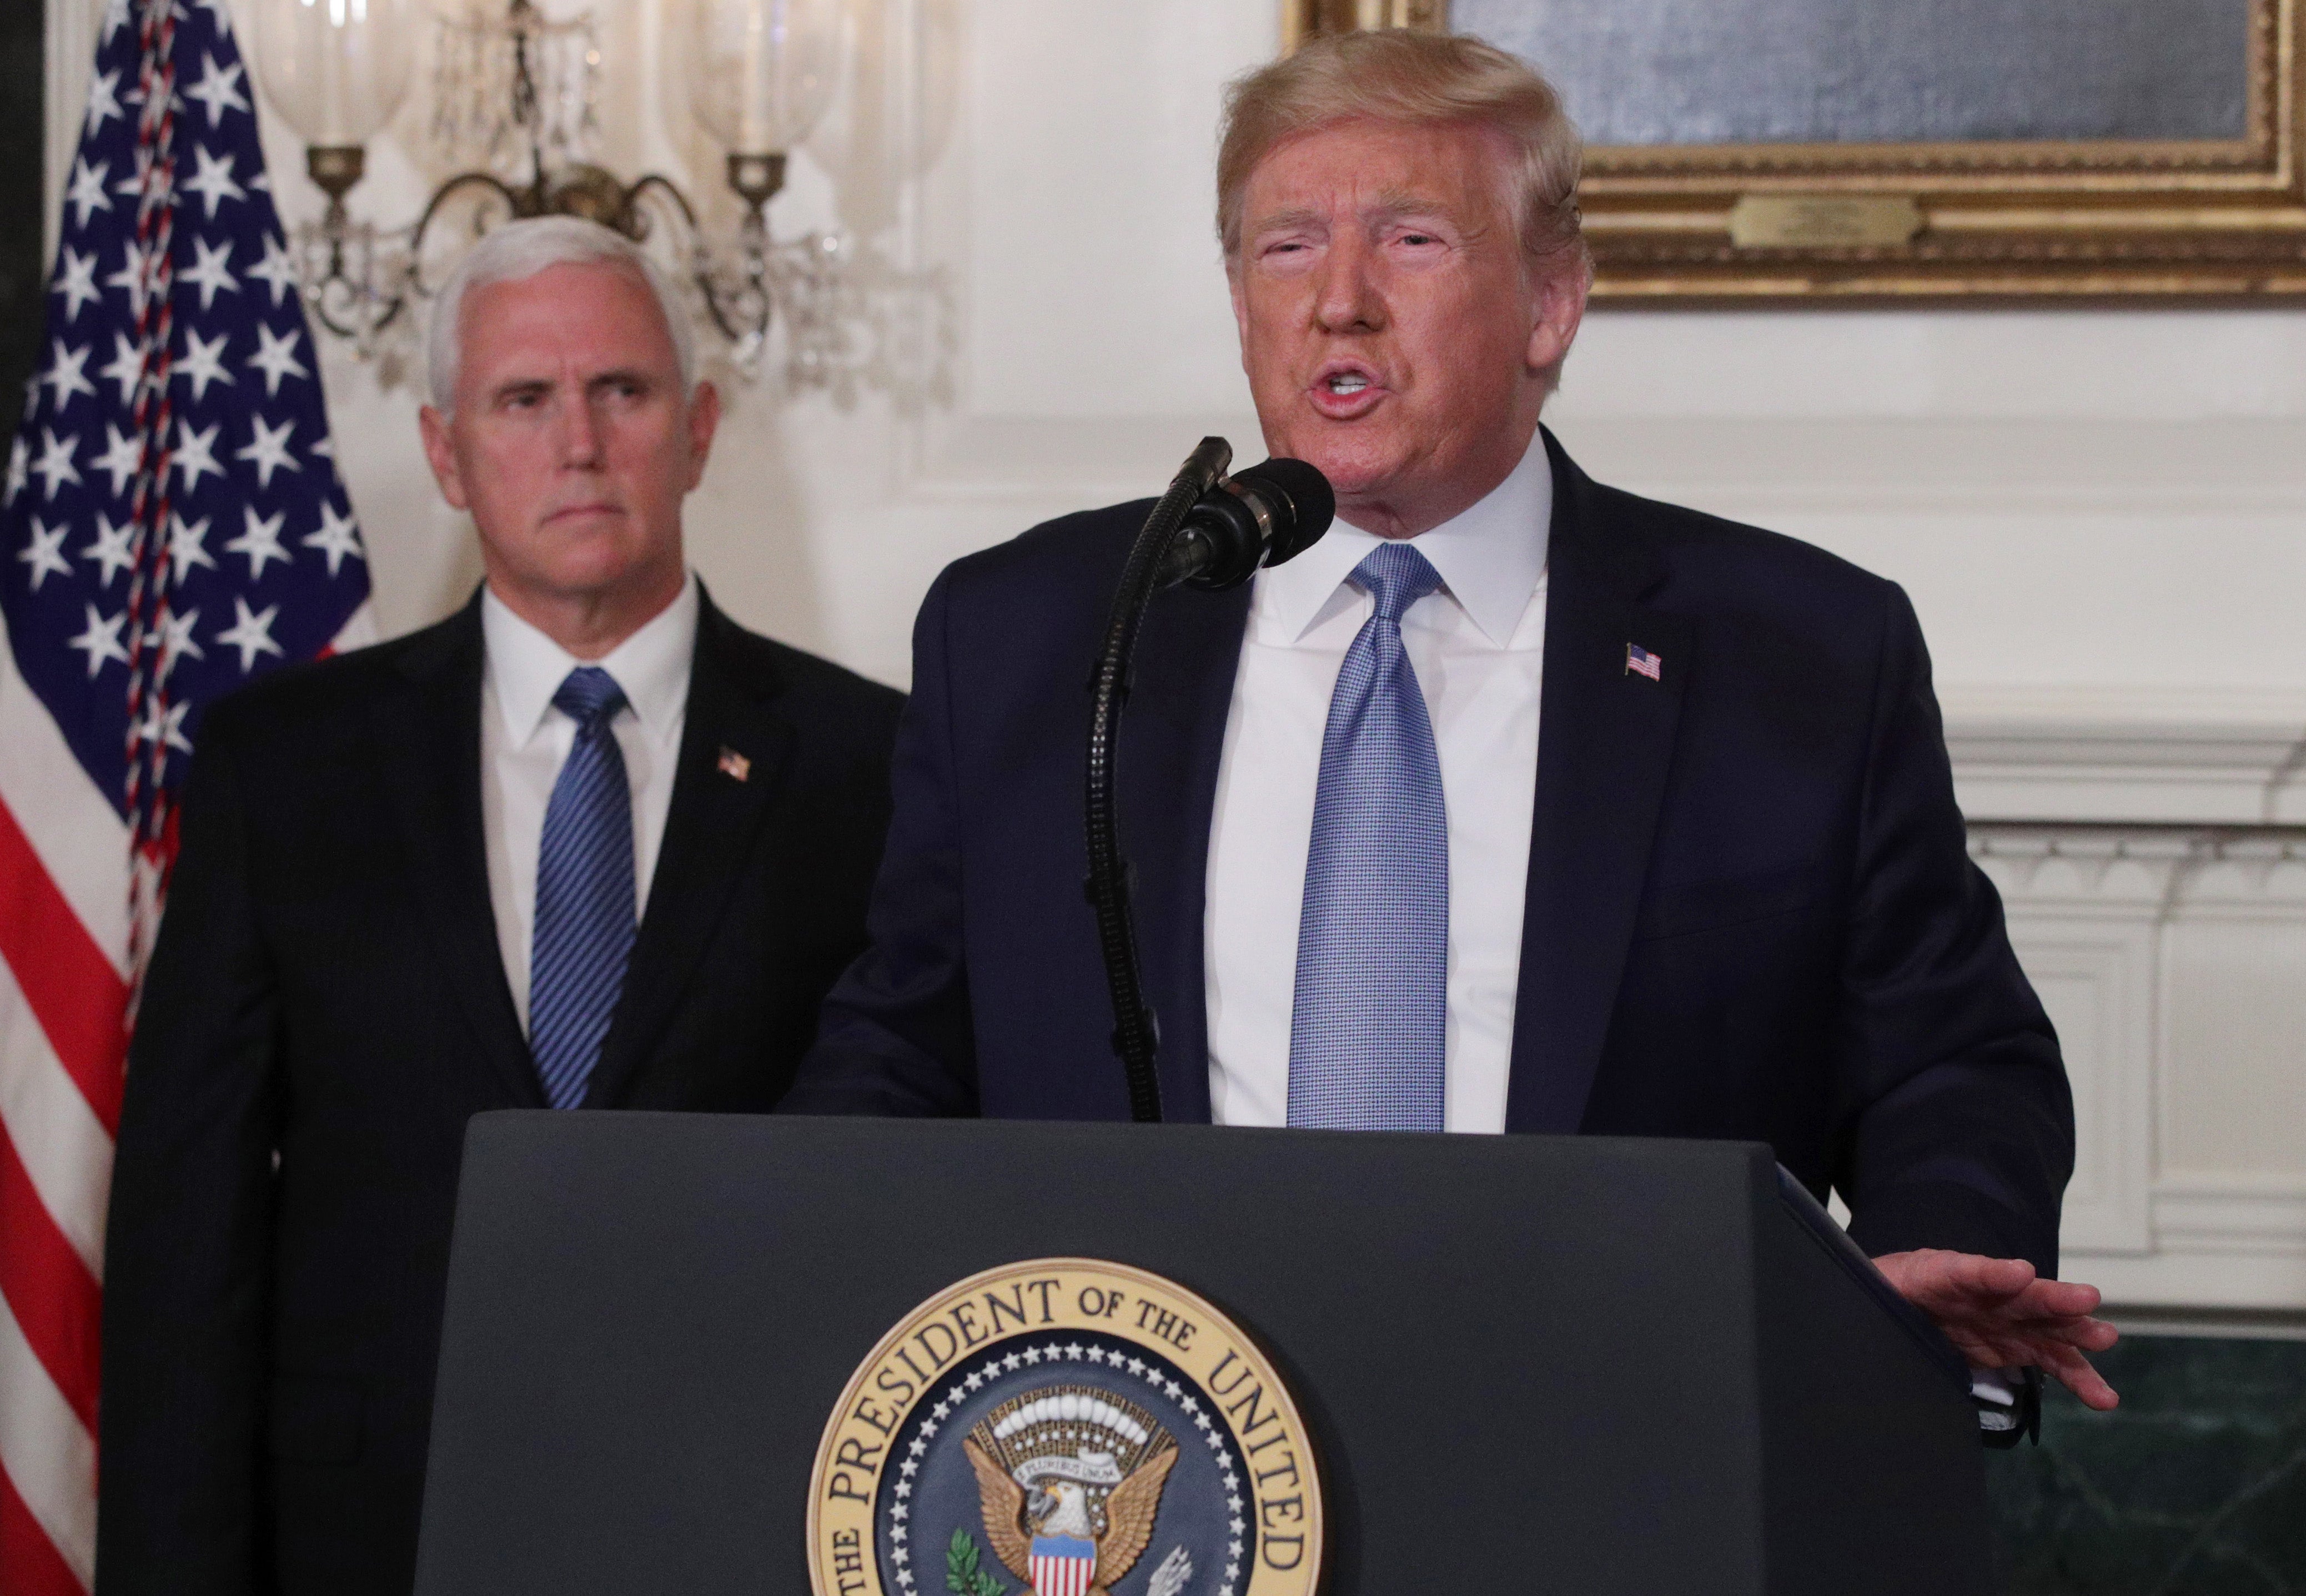 Donald Trump Condemns ‘White Supremacy’ During First Remarks Addressing El Paso, Dayton Mass Shootings